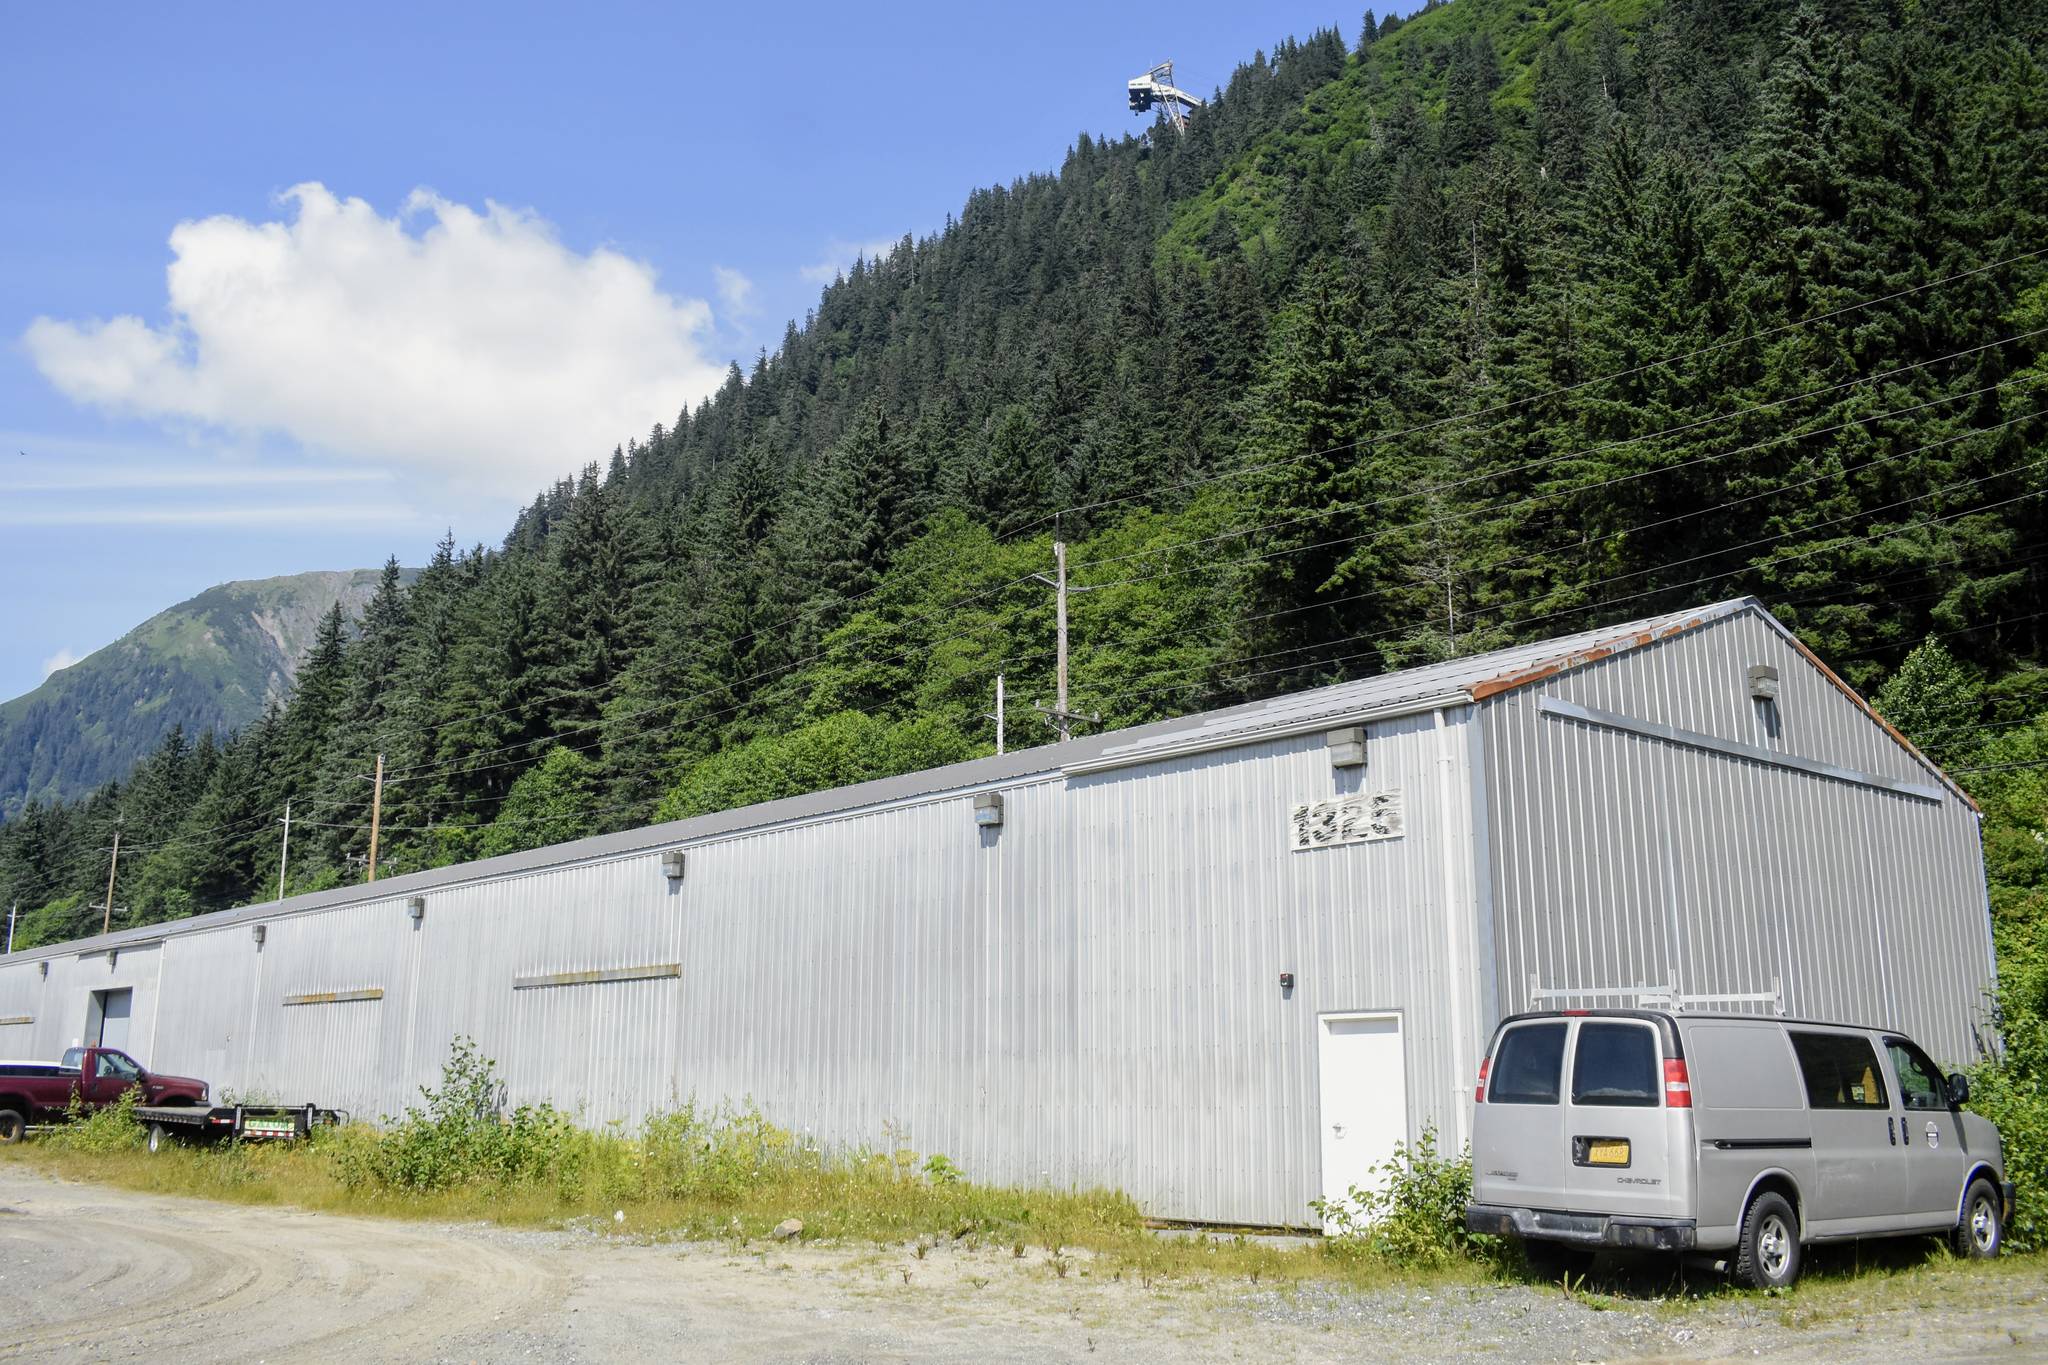 A surplus warehouse at 1325 Eastaugh Way, off Thane Road, is being considered by the City and Borough of Juneau as a possible location for a ballot-counting center should the city decide to increase its use of voting by mail in future municipal elections. On Monday, CBJ Assembly members heard public feedback on the proposal. (Peter Segall / Juneau Empire File)